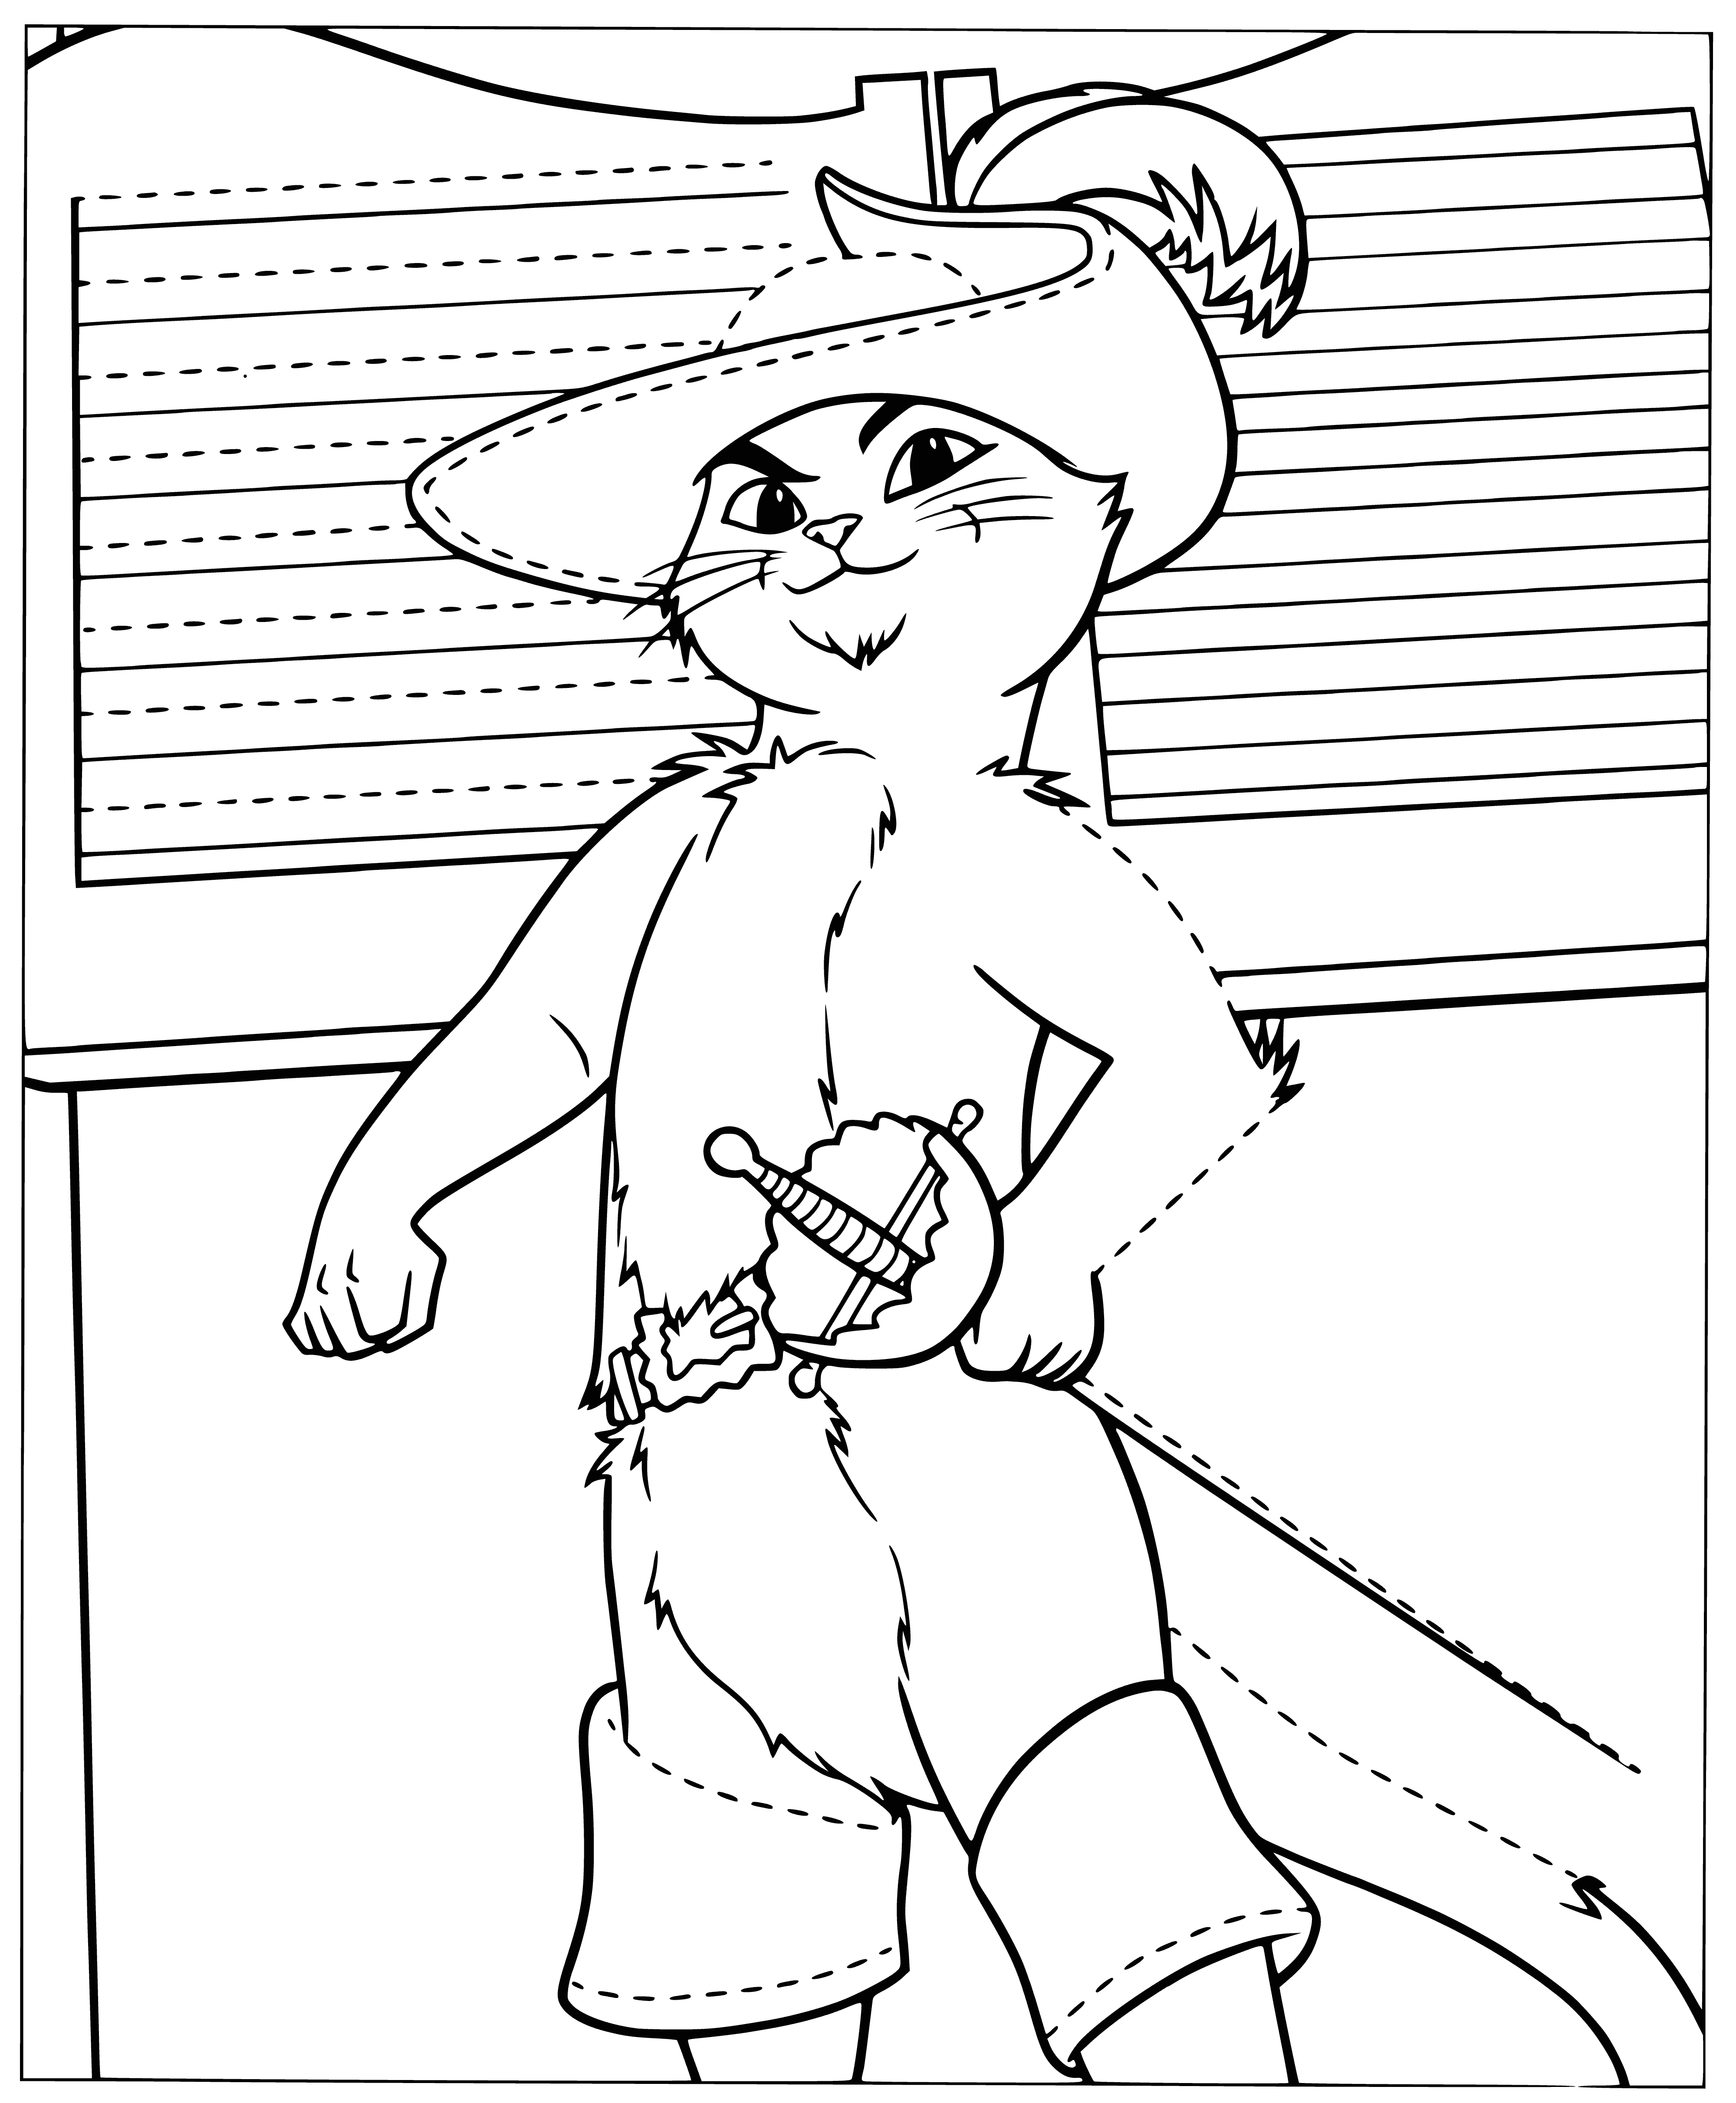 coloring page: Puss in Boots: fierce feline in red hat, coat and sword, ready to fight!